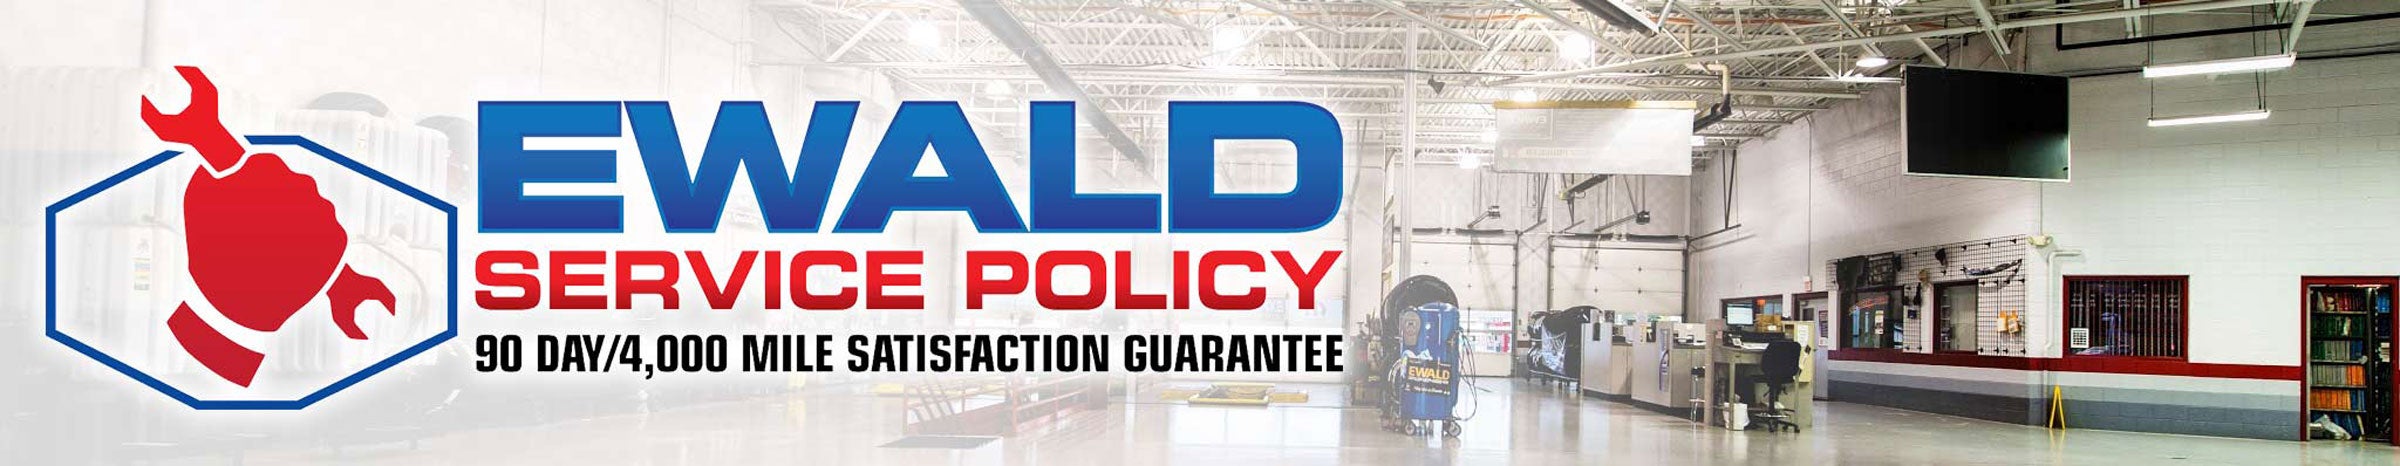 Ewald Automotive Group Service Policy 90 Day/4,000 Mile Satisfaction Guarantee